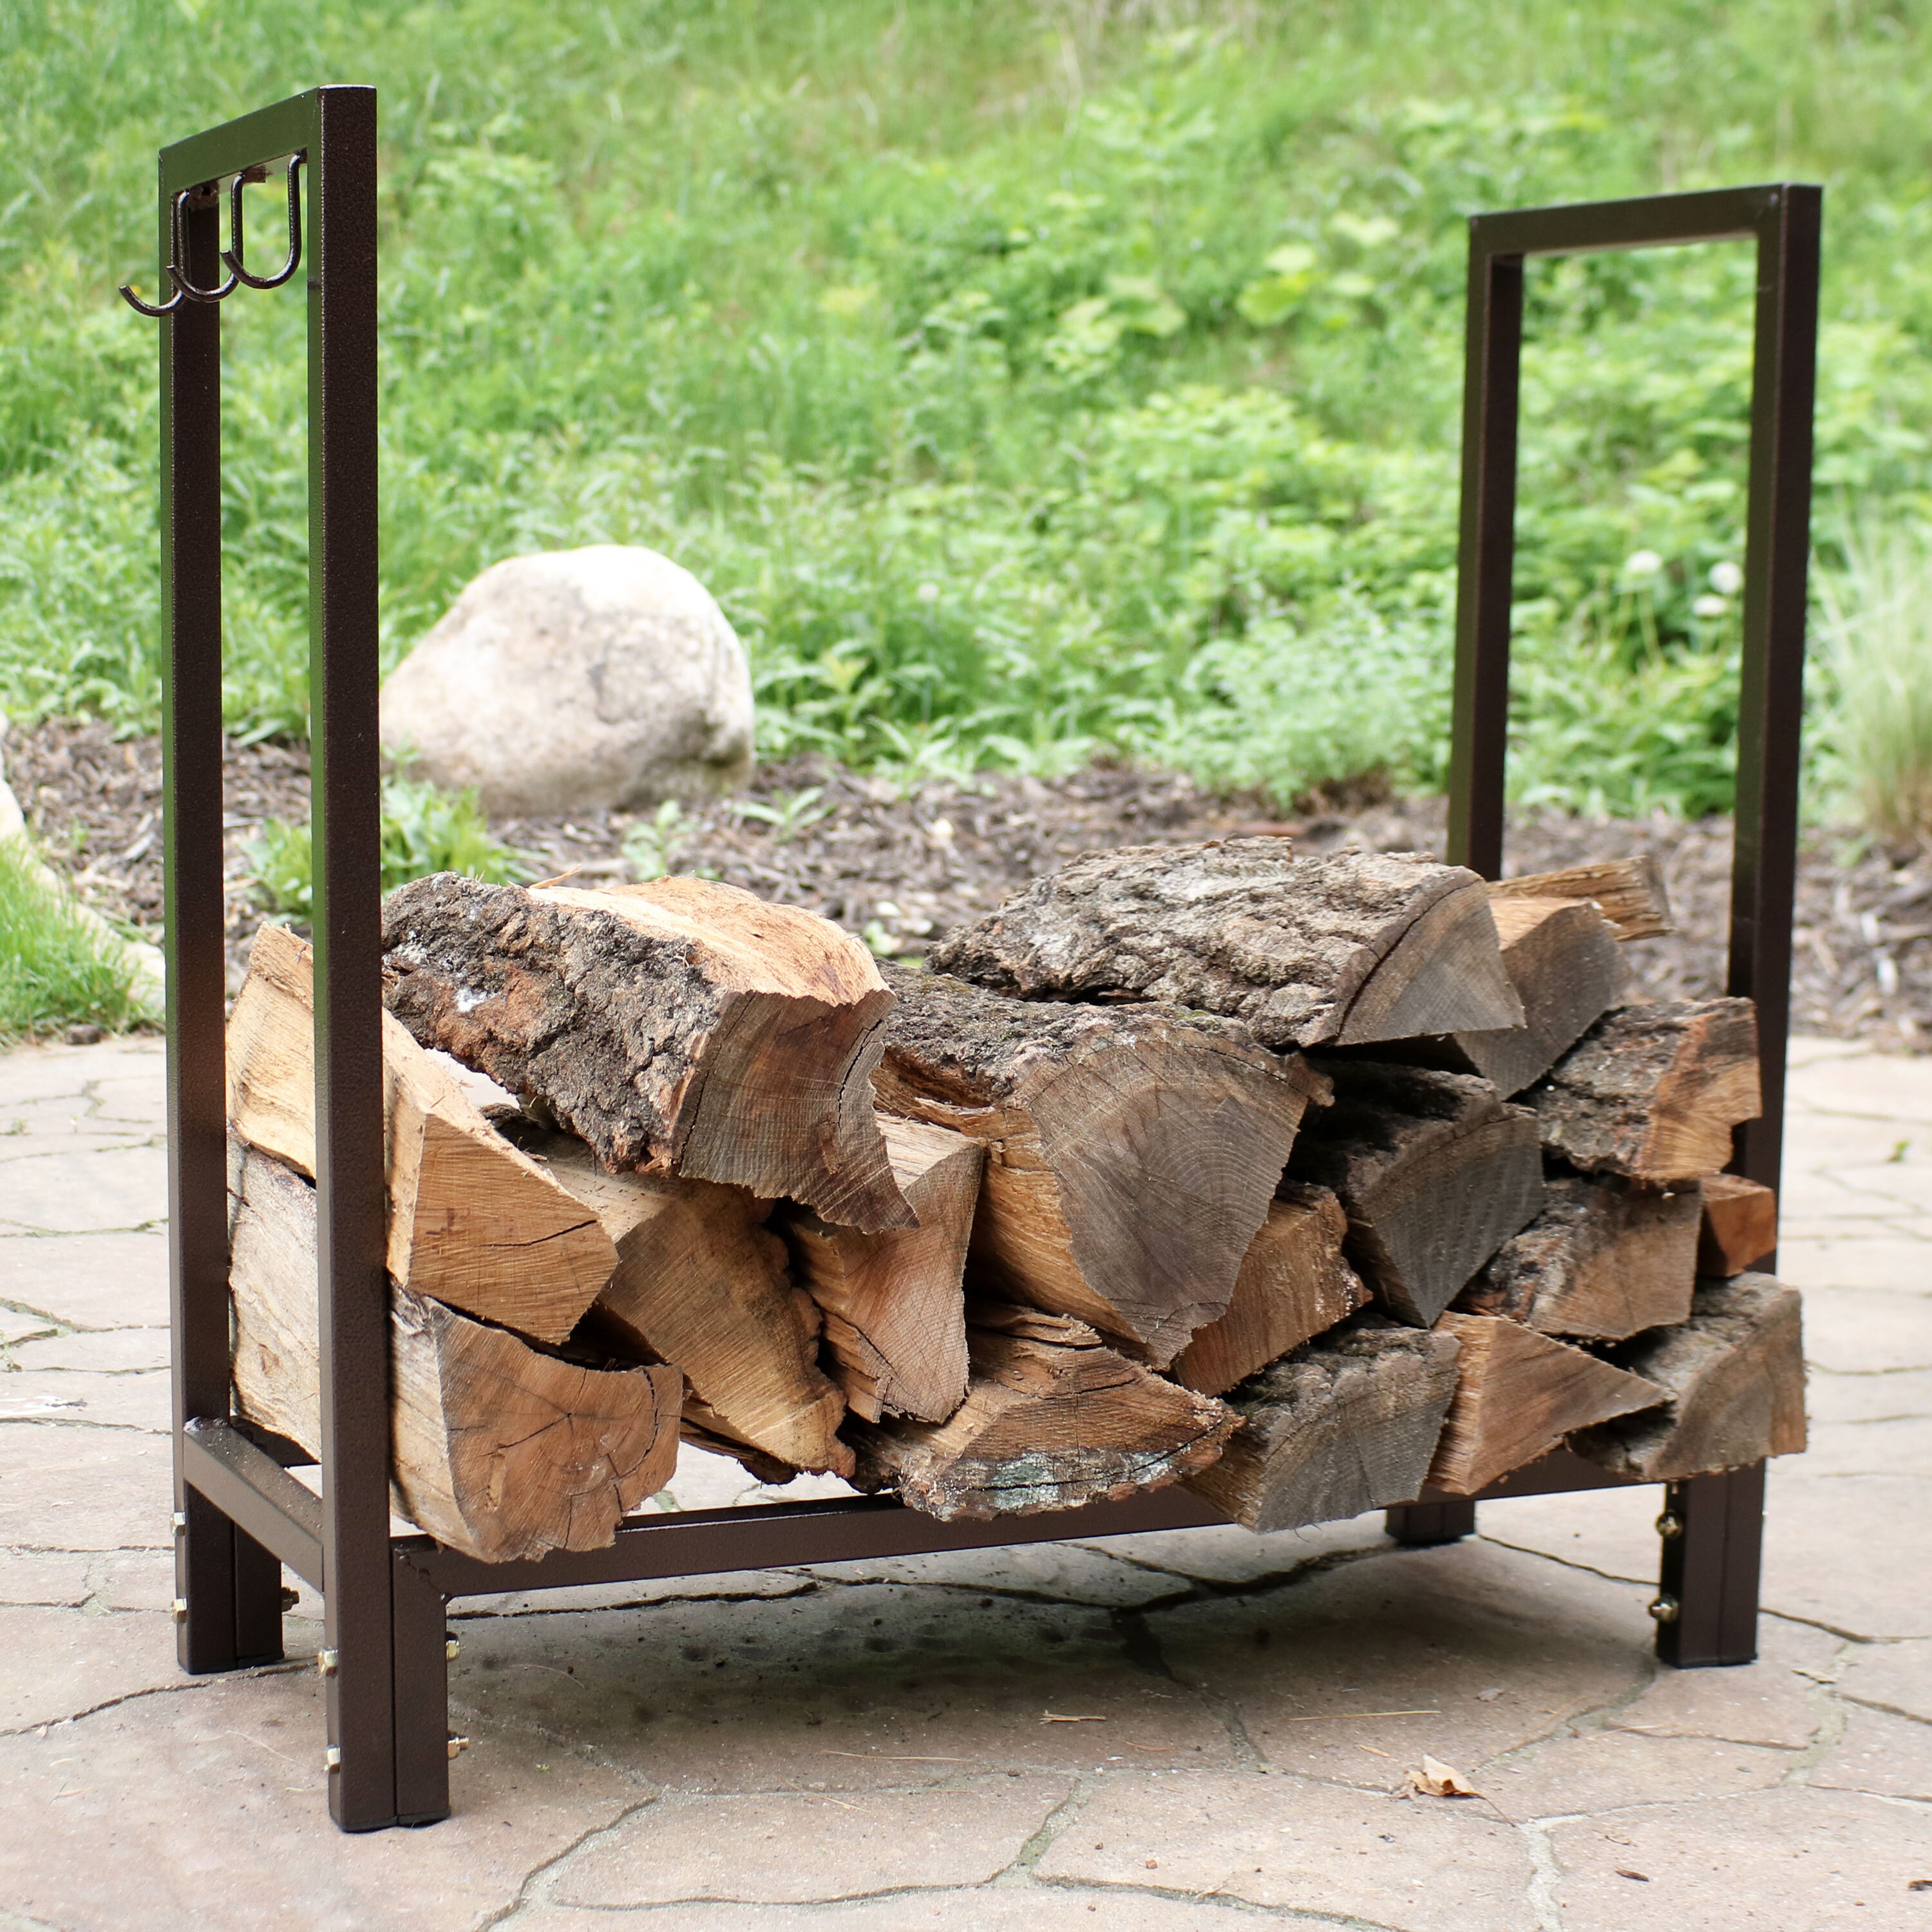 Why should we buy a firewood rack?